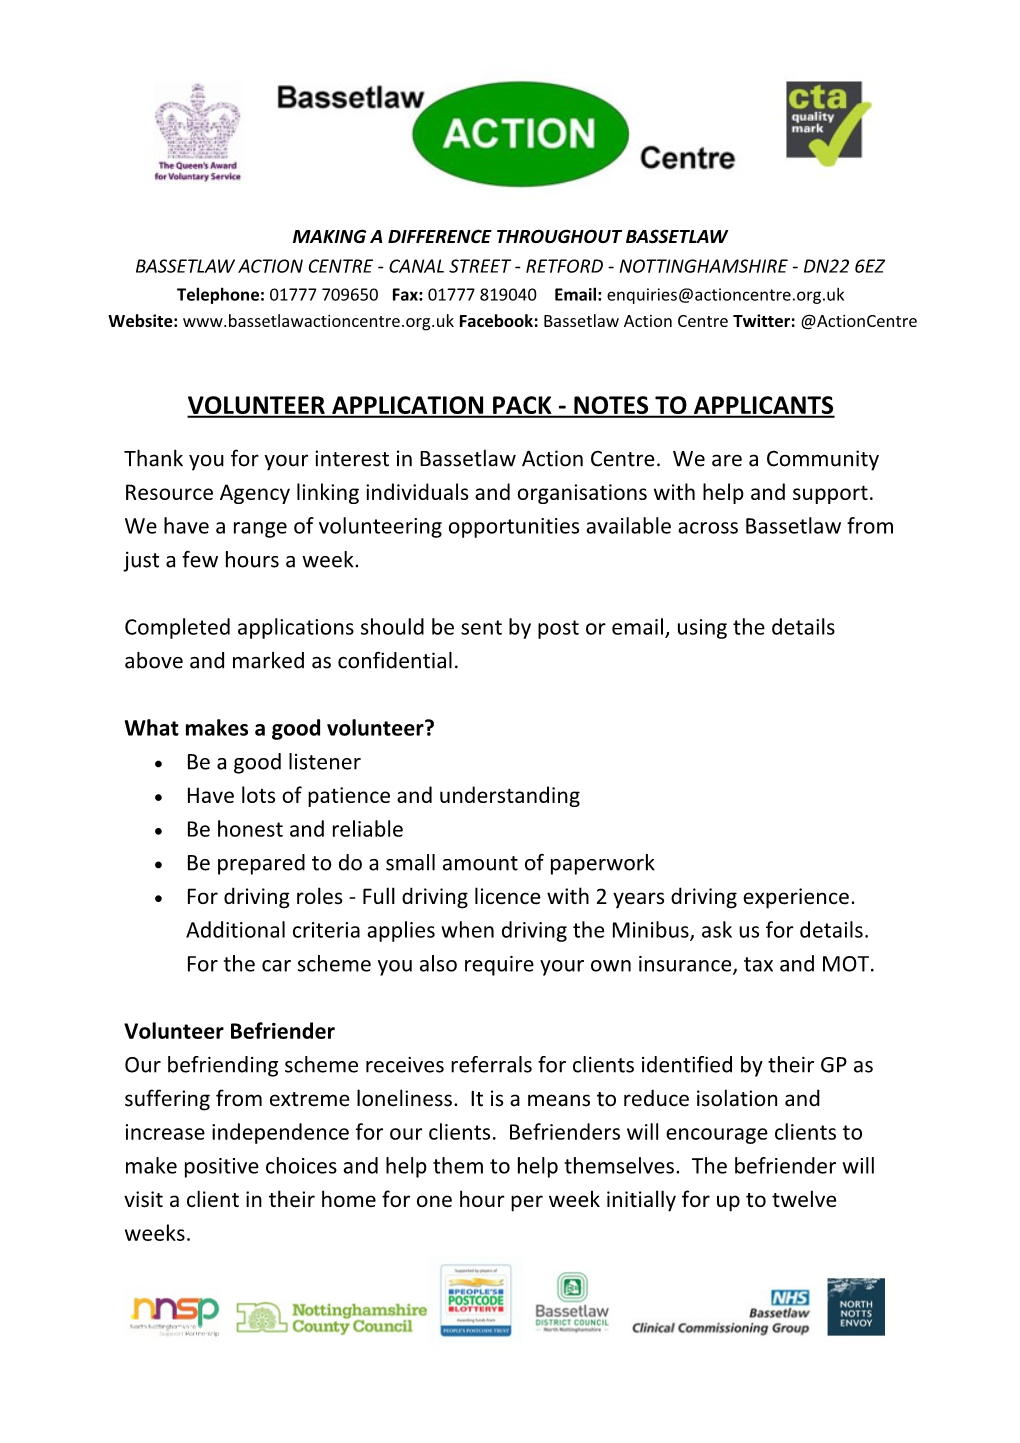 Volunteer Application Pack - Notes to Applicants